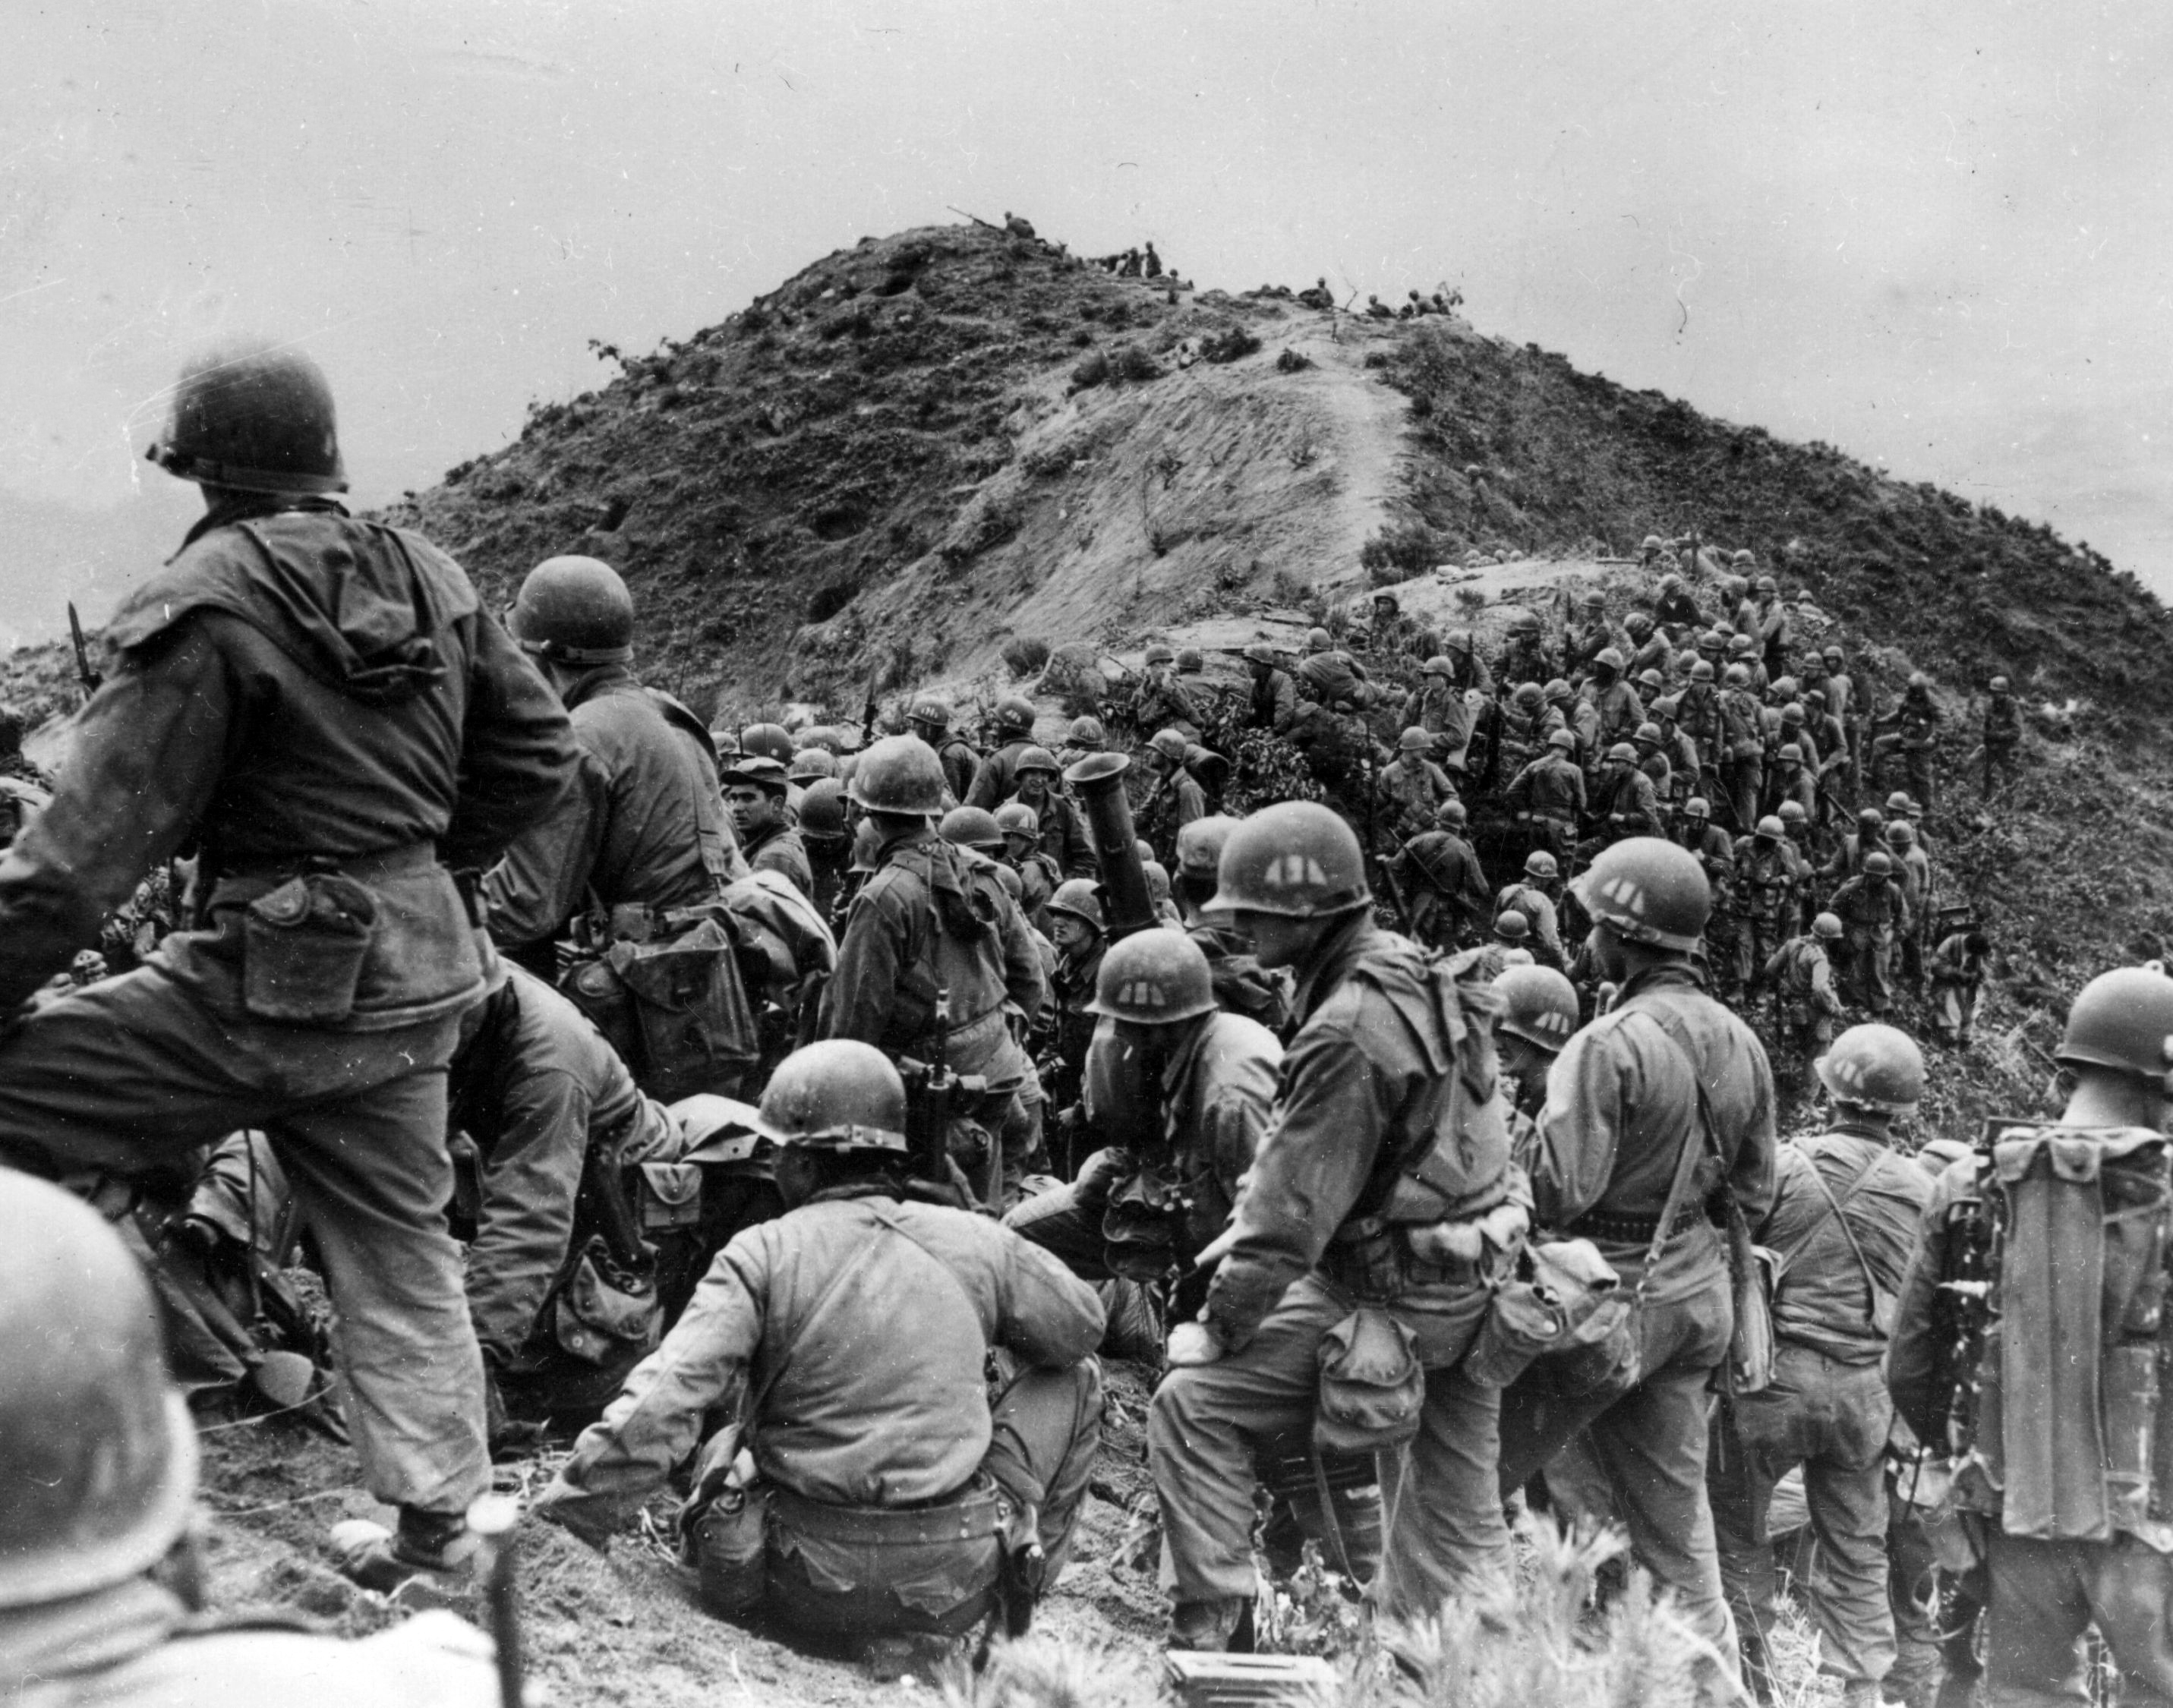 The Korean War lasted for three years before an armistice was signed in 1953. Getty Images